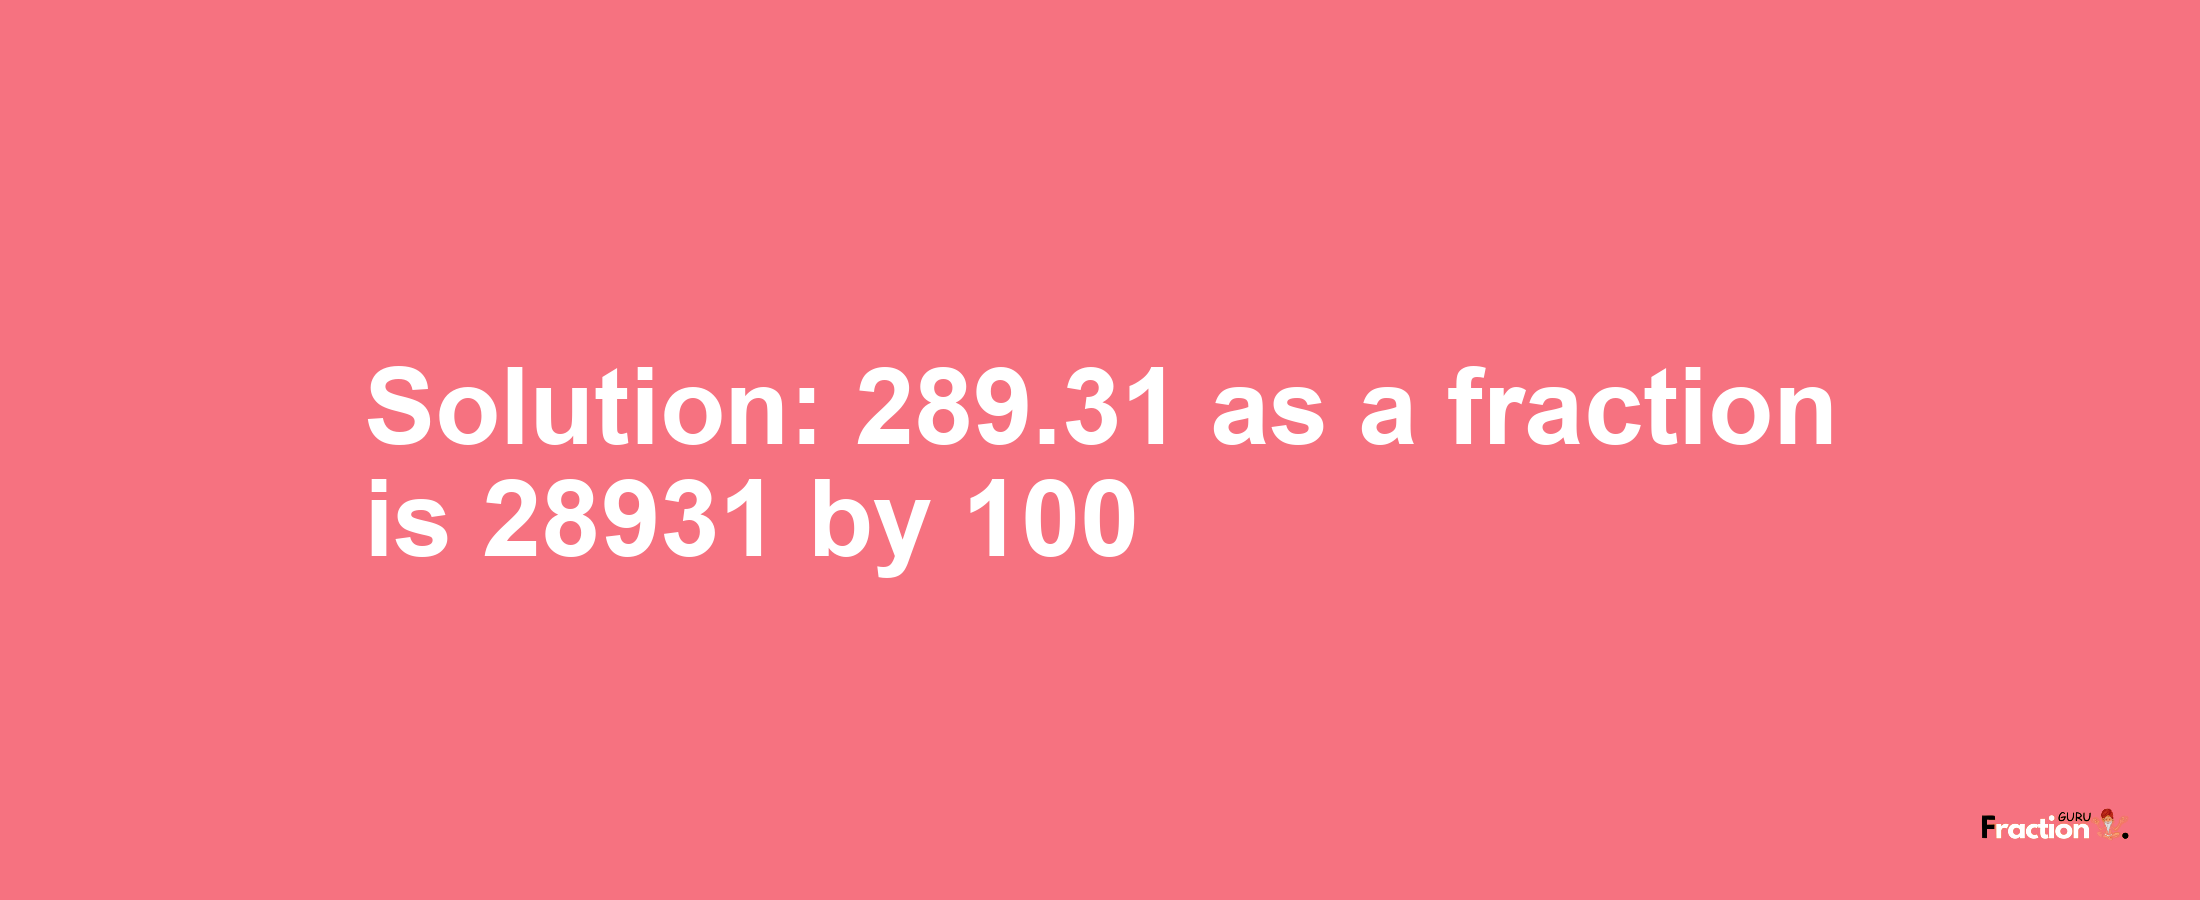 Solution:289.31 as a fraction is 28931/100